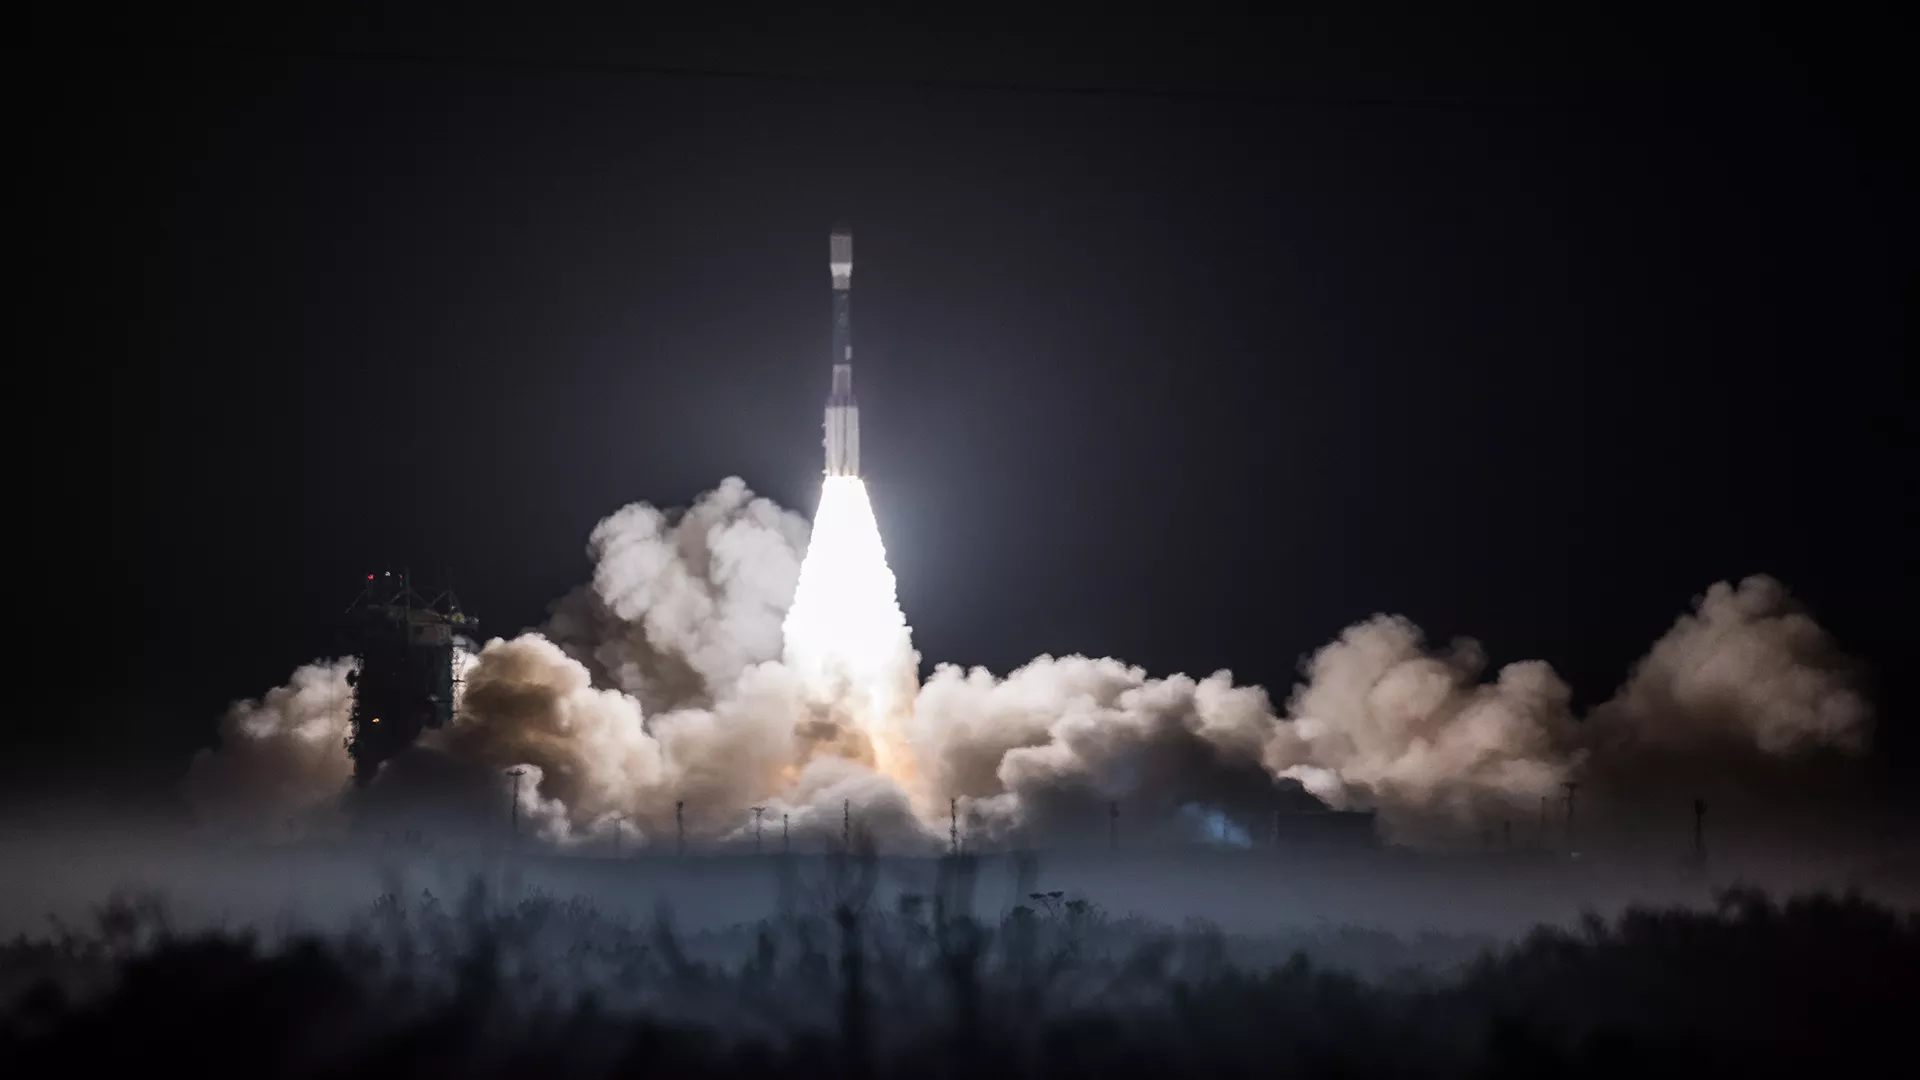 Image of JPSS-1 Satellite taking off from the launch pad on a rocket at night.